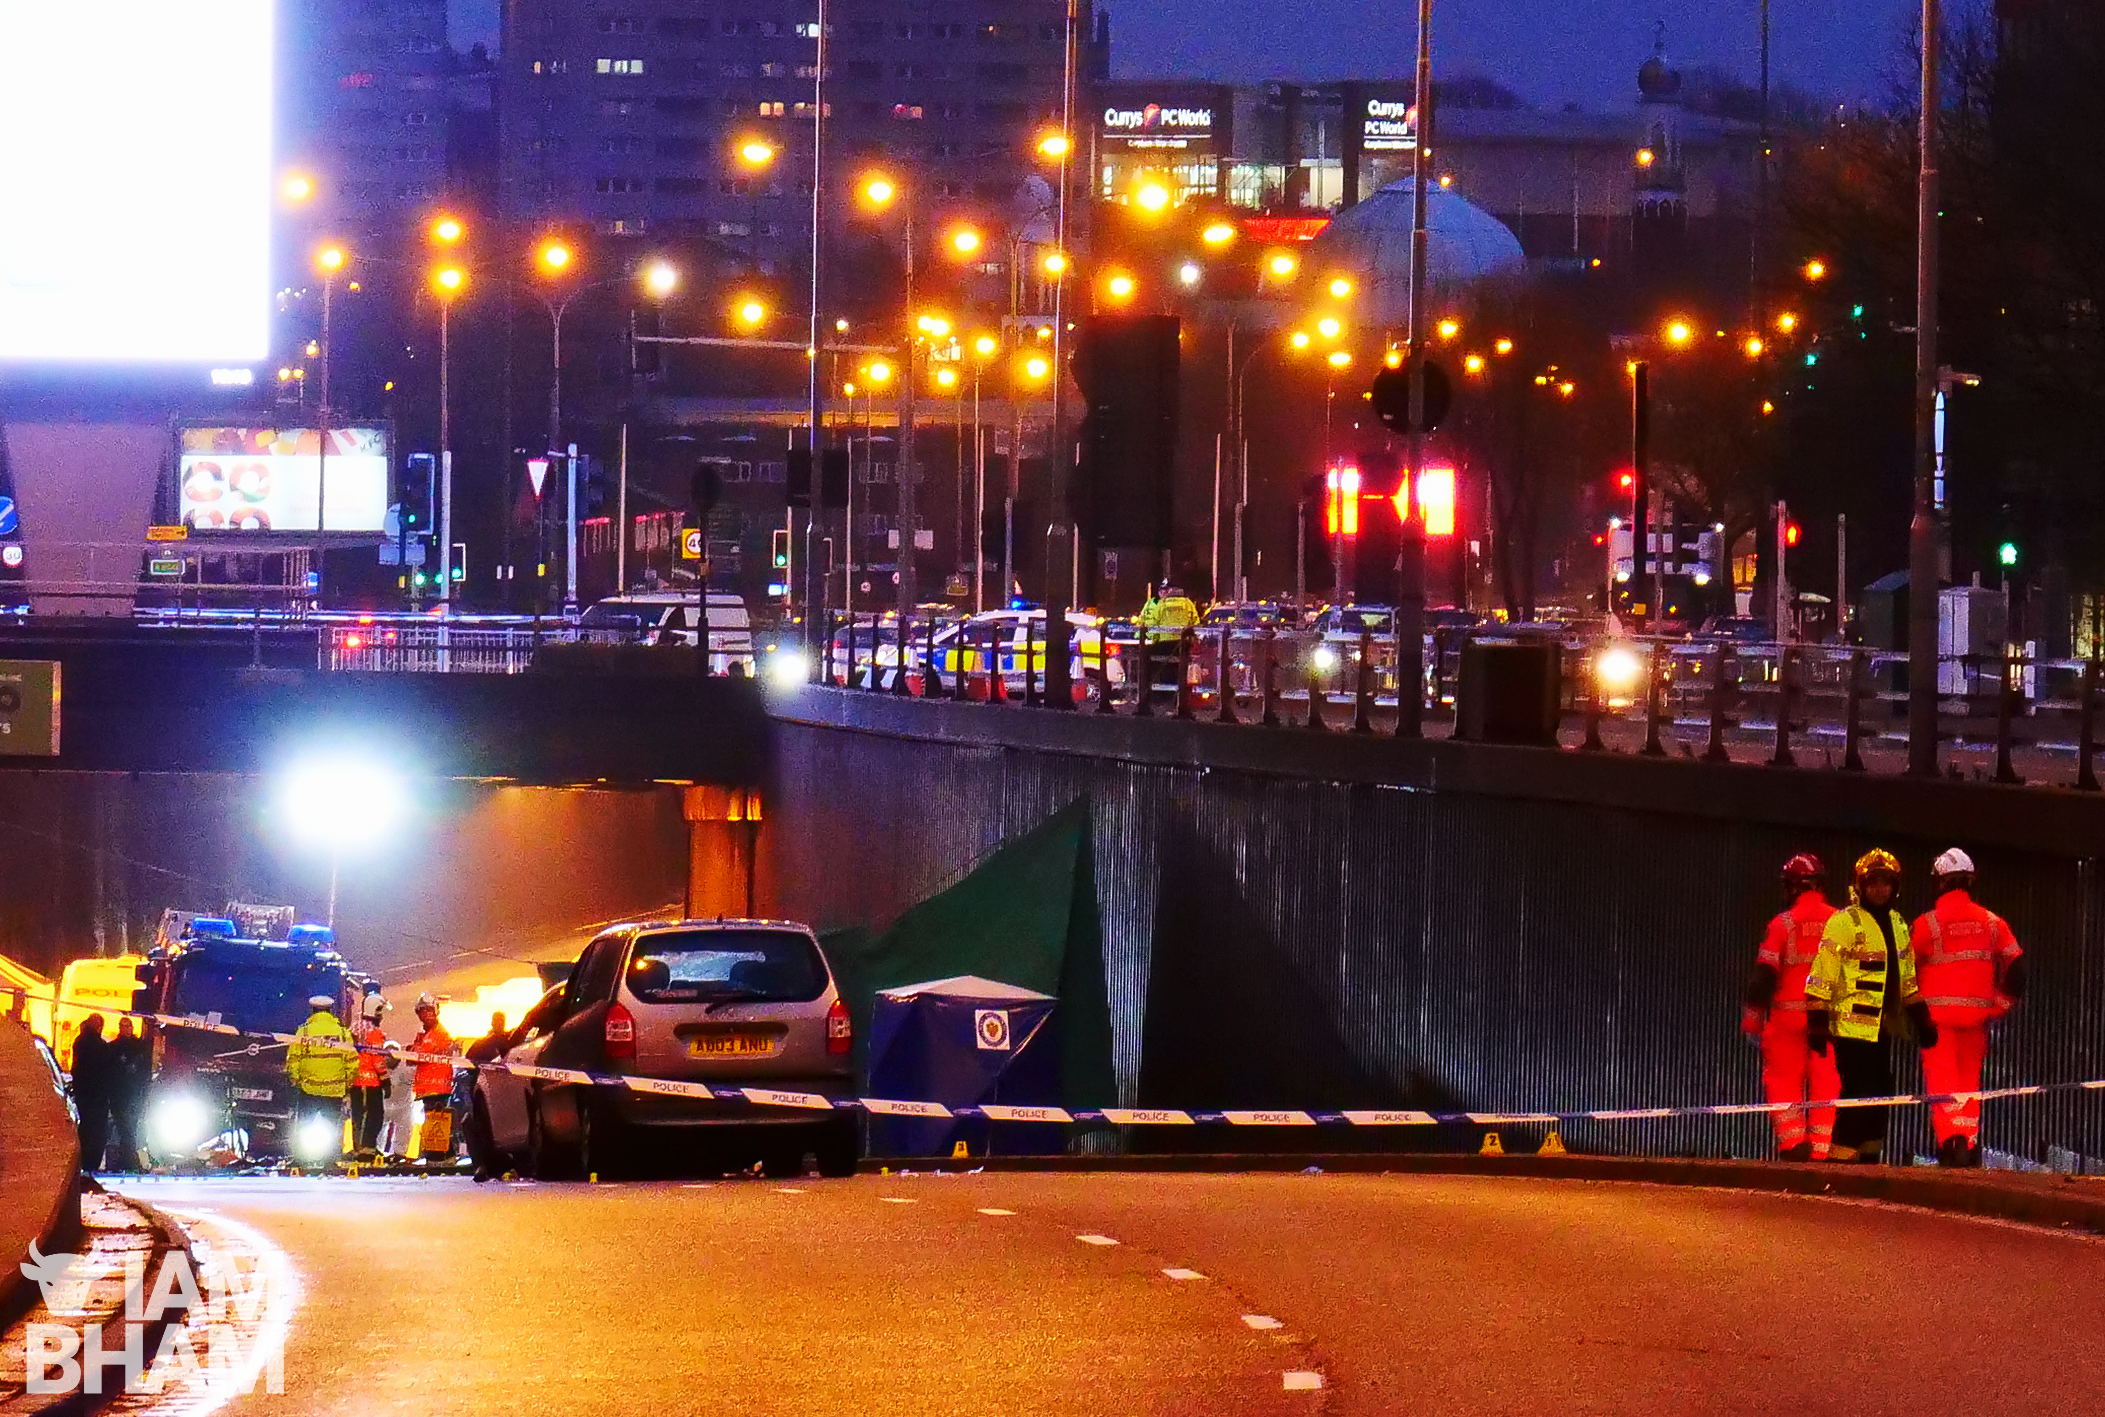 Six people were killed after a multiple-vehicle crash at the underpass on Lee Bank Middleway in Edgbaston